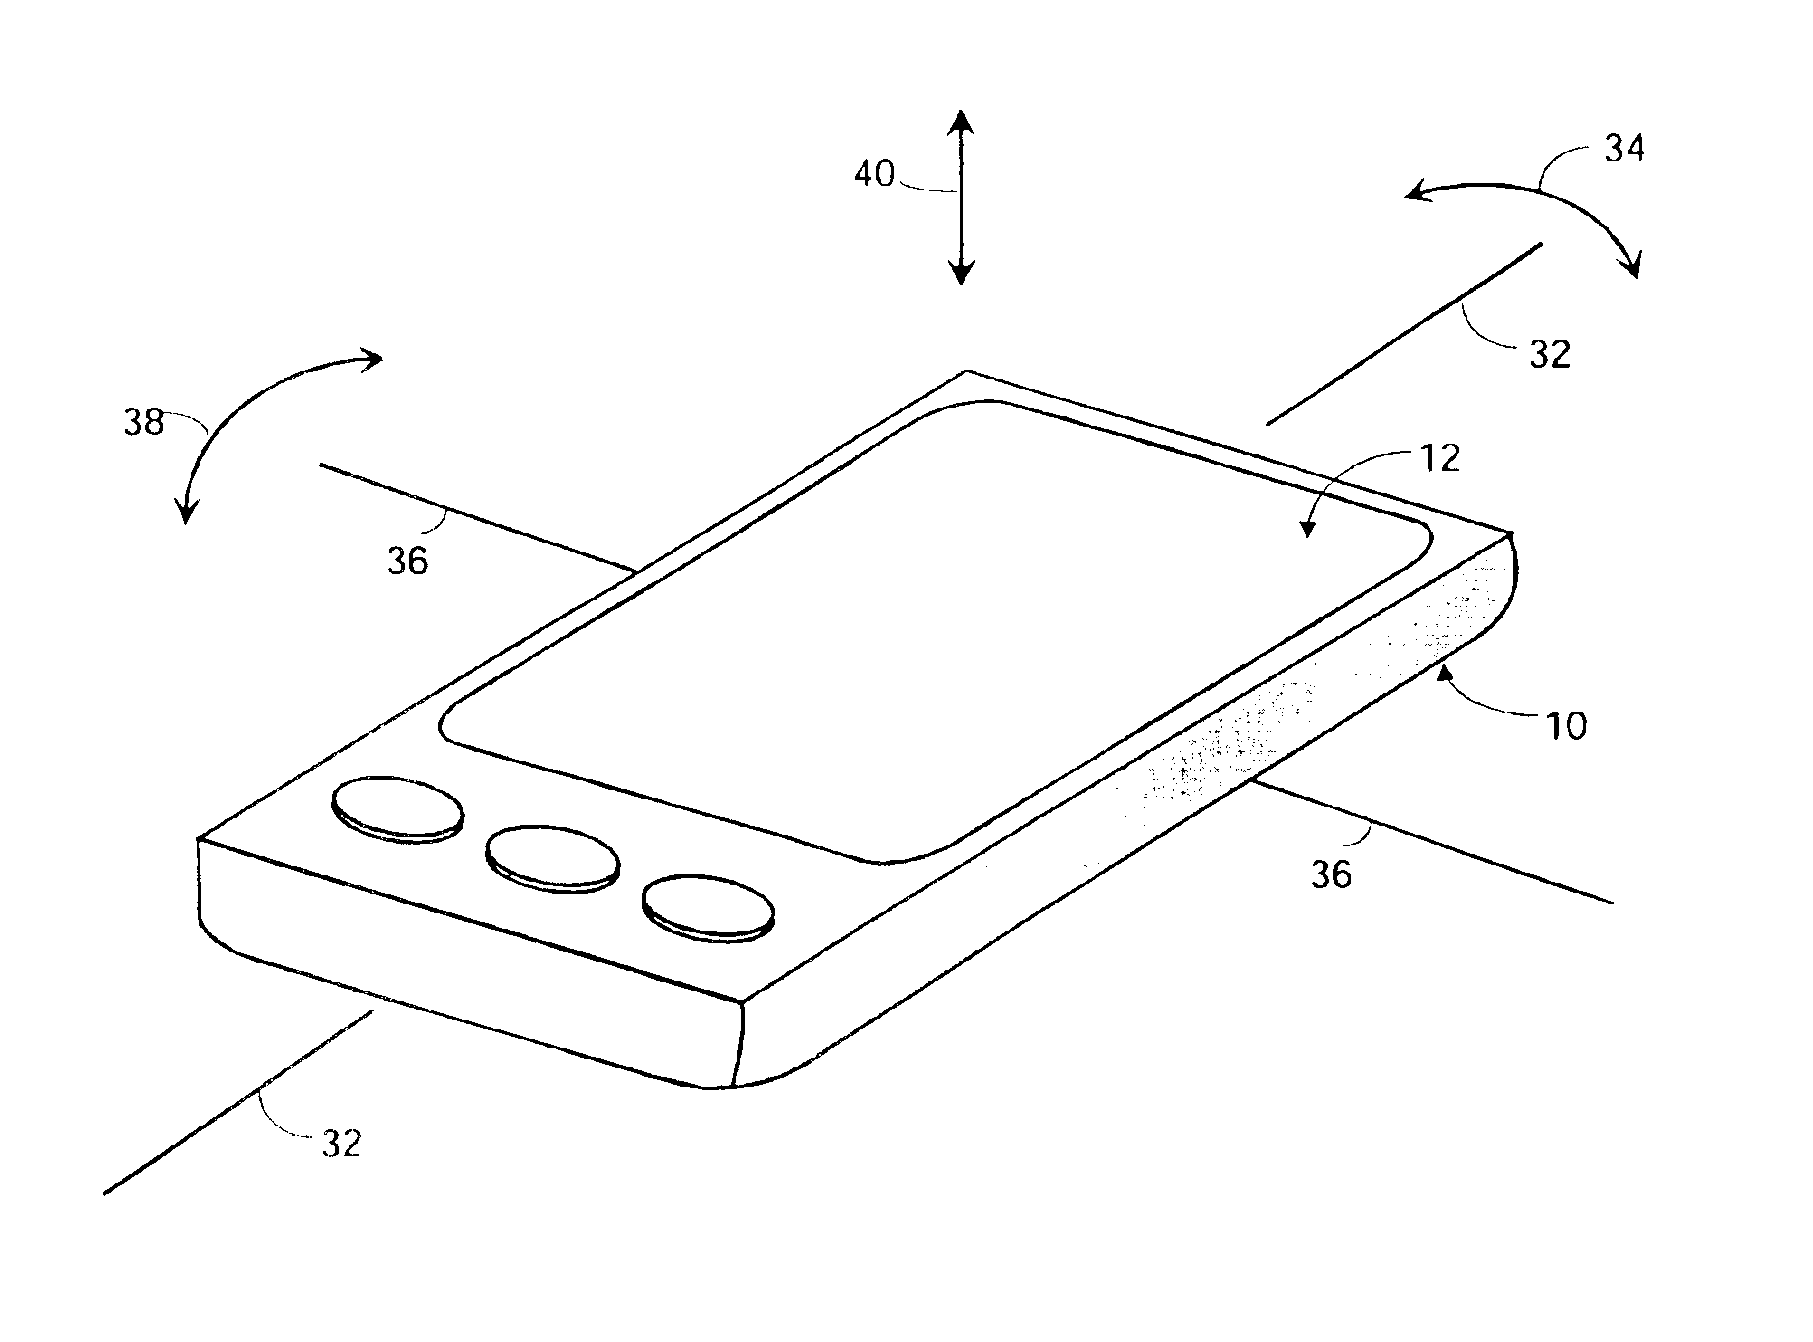 View navigation and magnification of a hand-held device with a display